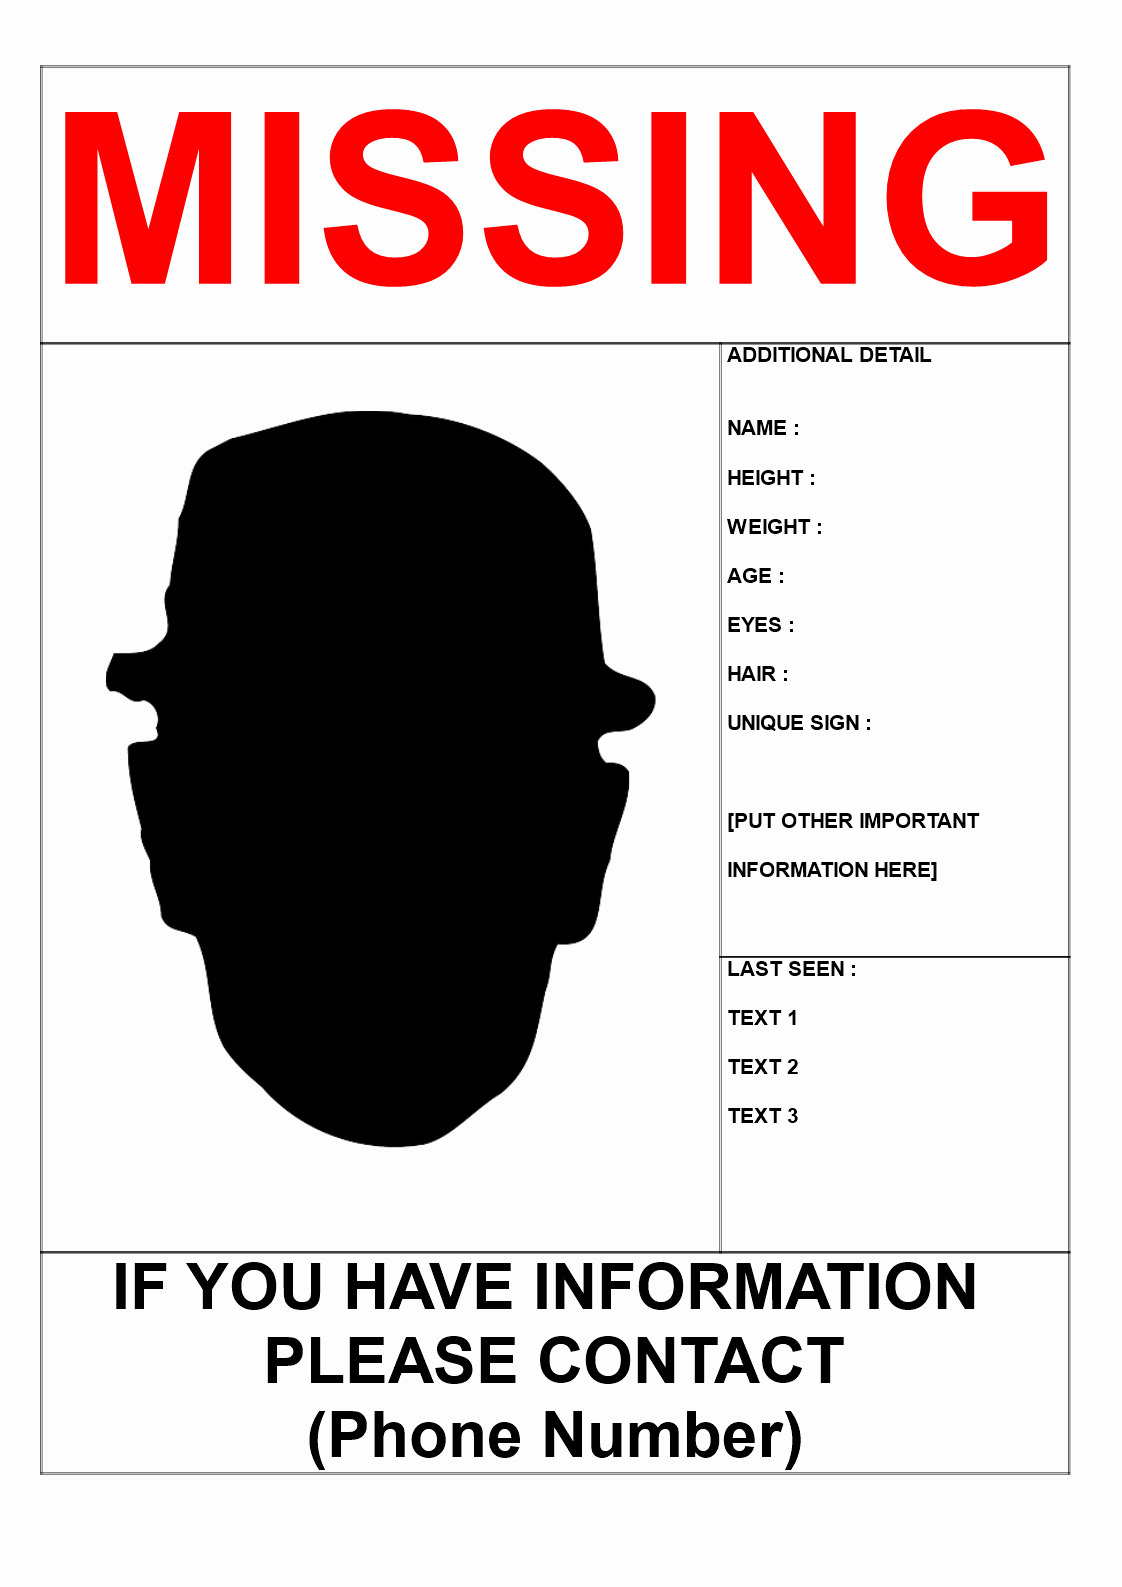 Missing Person Poster Template Luxury Free Missing Person Poster Template In A3 Size